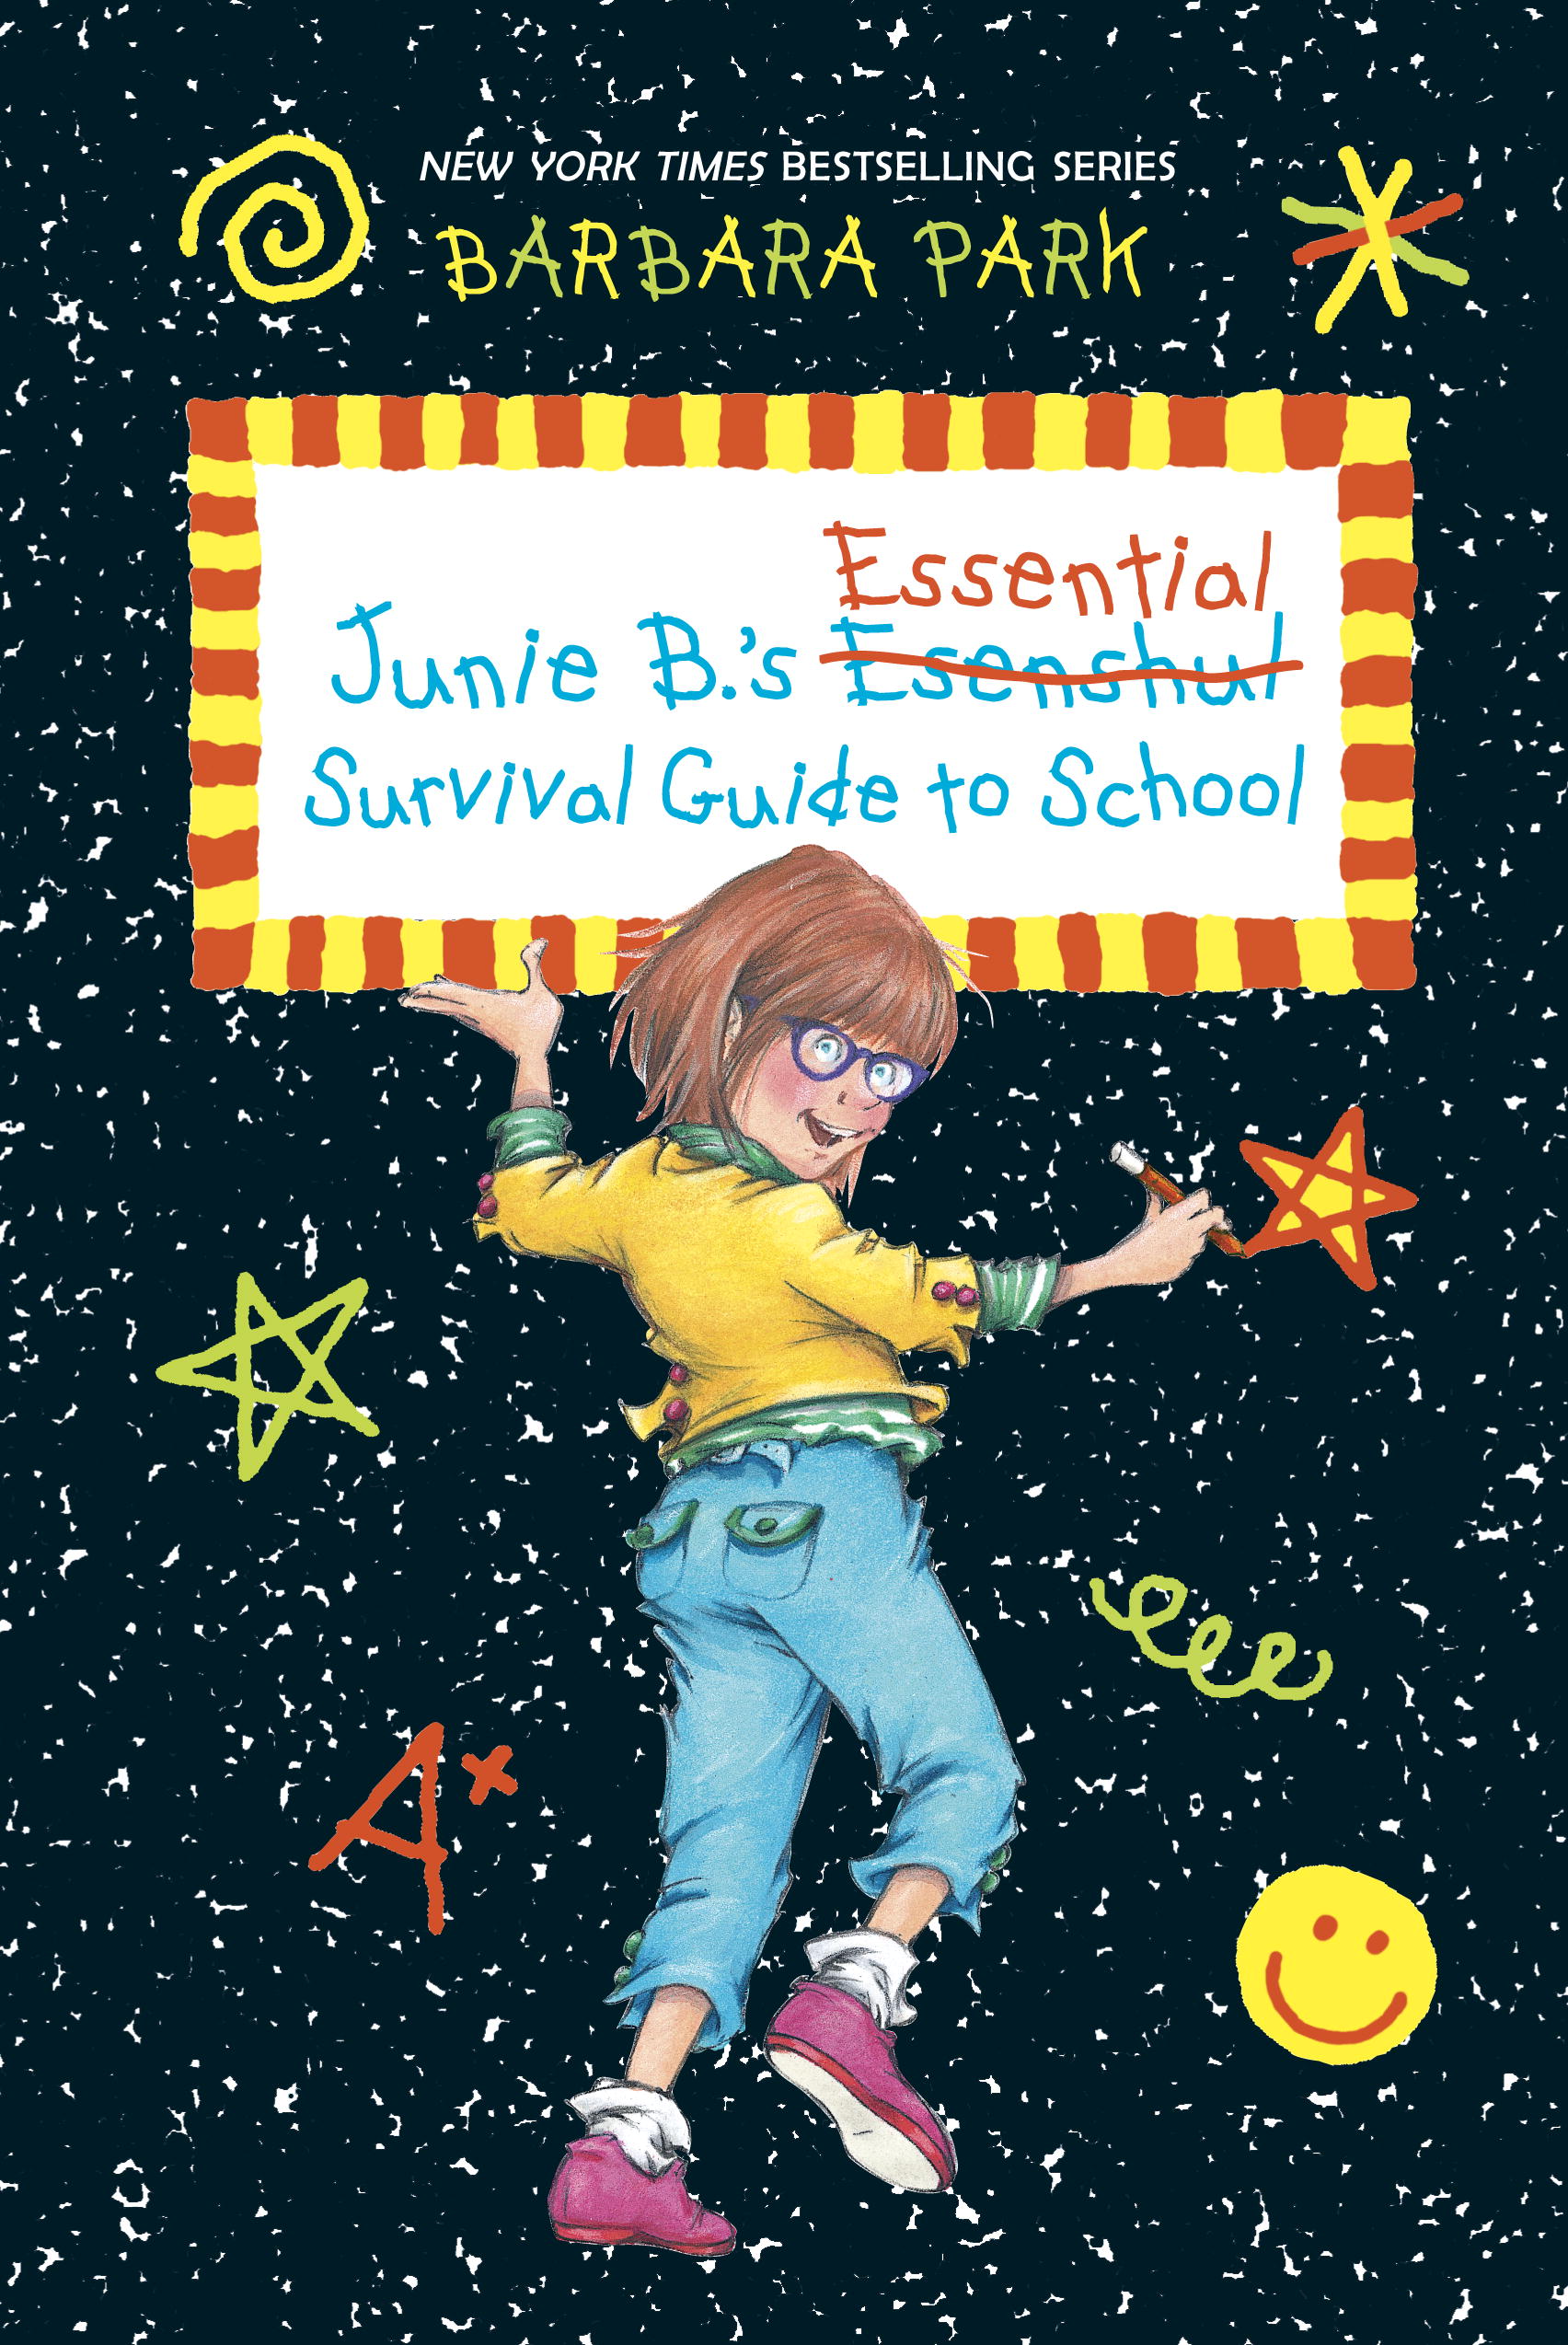 Junie B.’s Essential Survival Guide To School (Family) May 2016